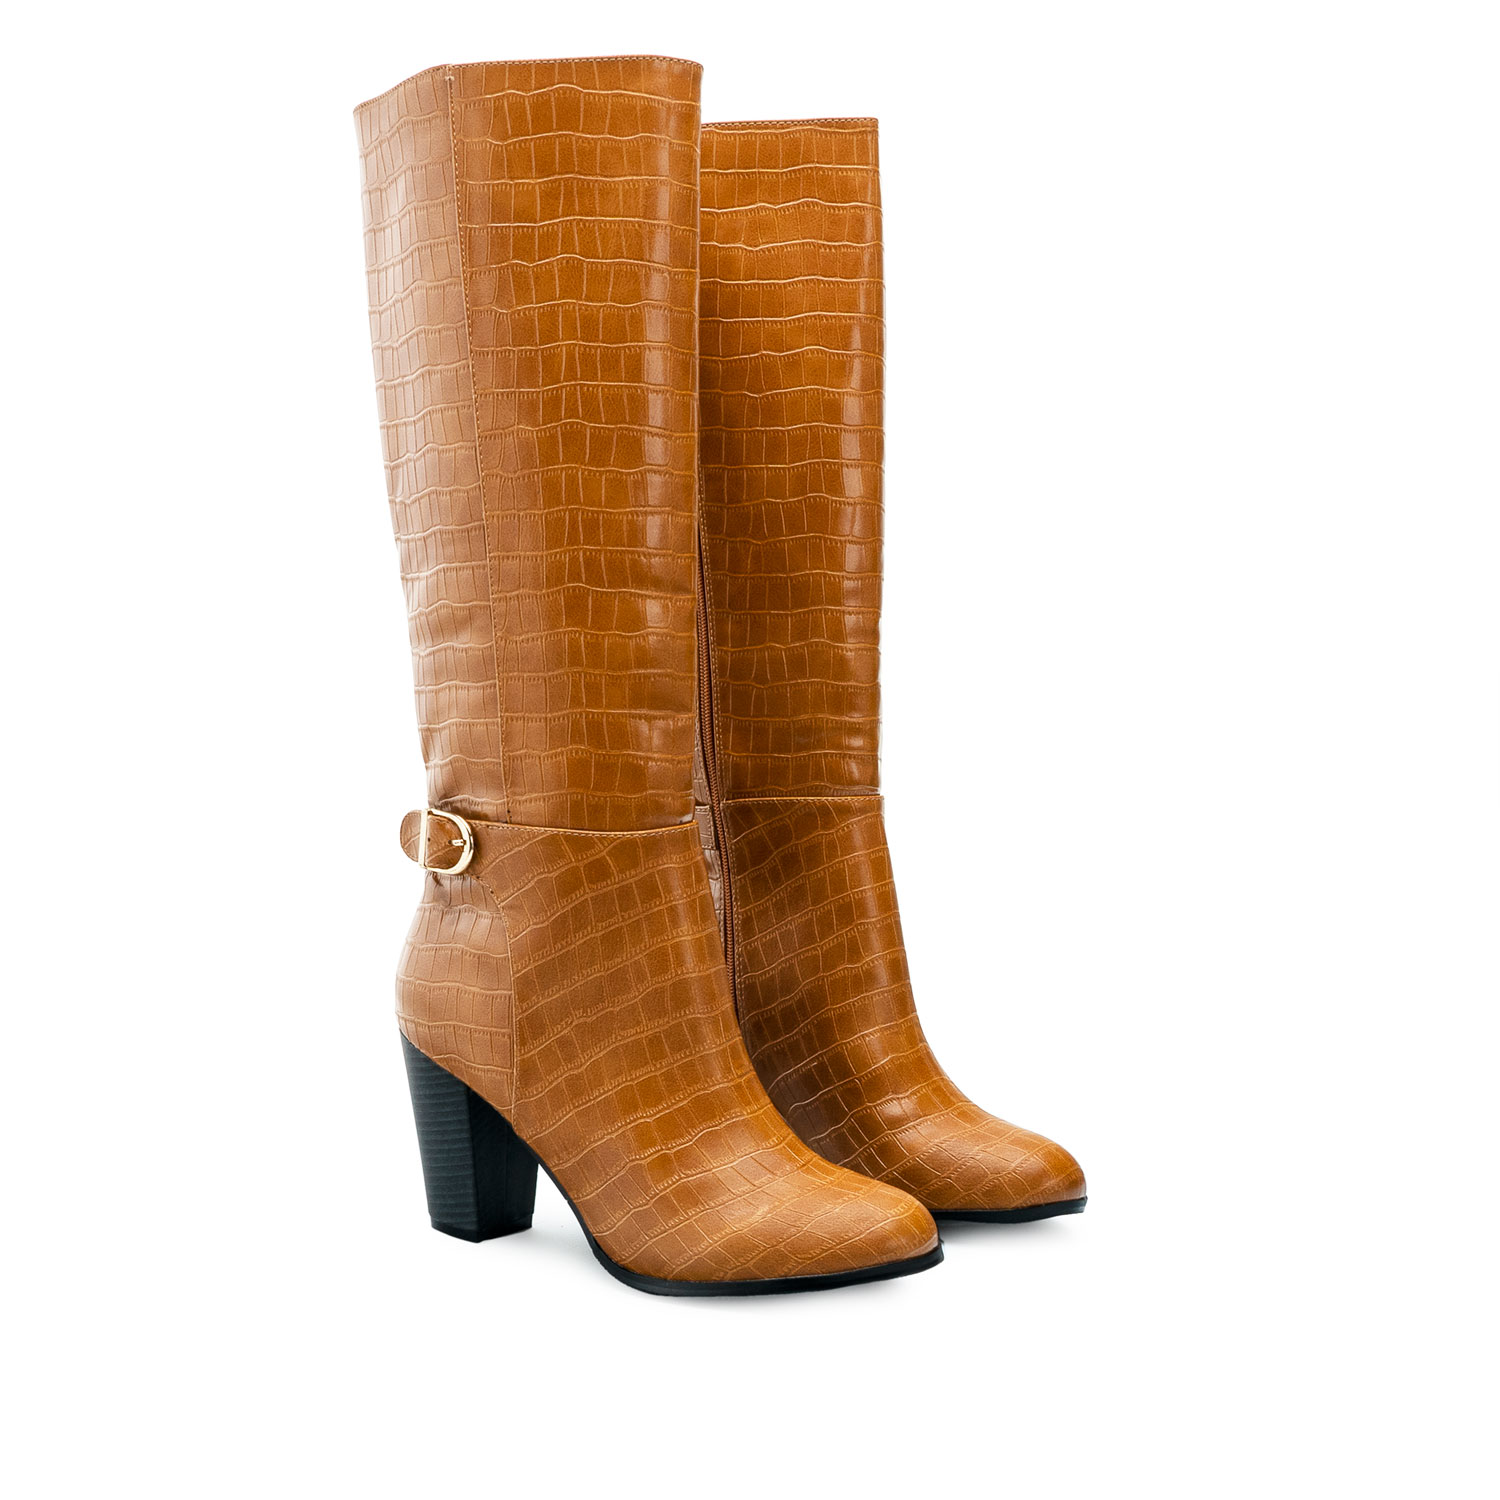 Buckled Boots in Camel-coloured Croc 